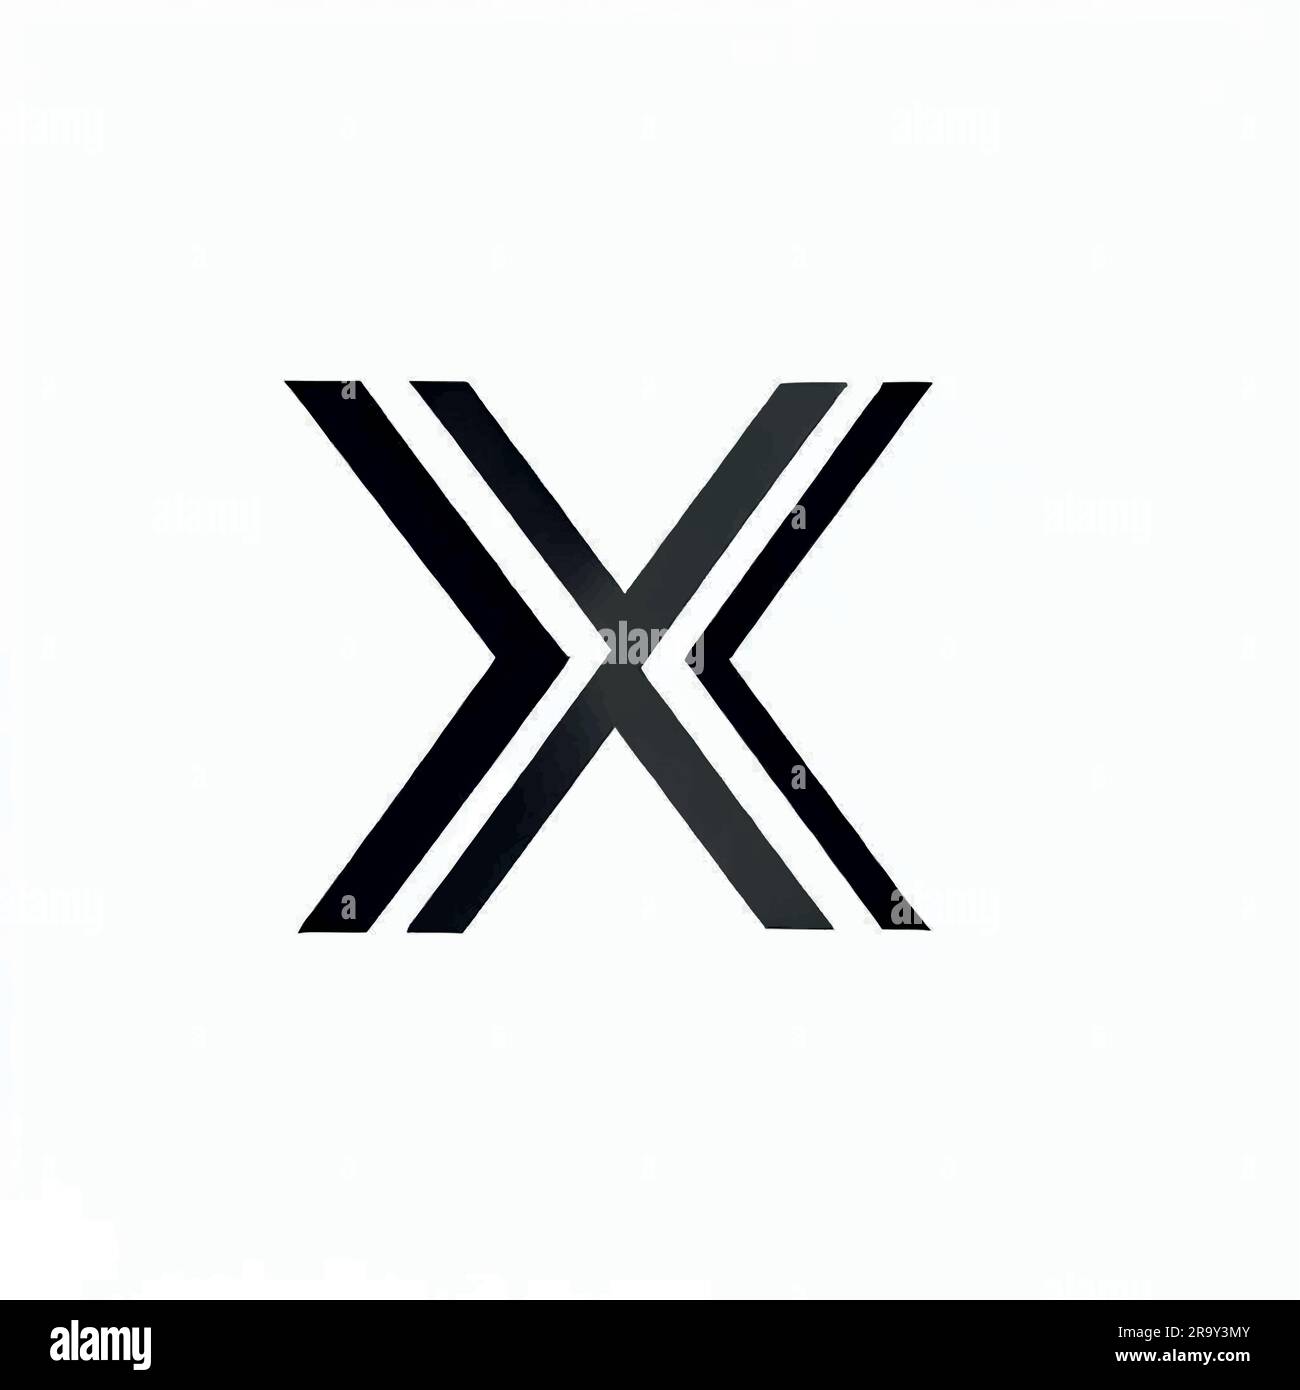 logo illustration of the letter x on a white background Stock Vector